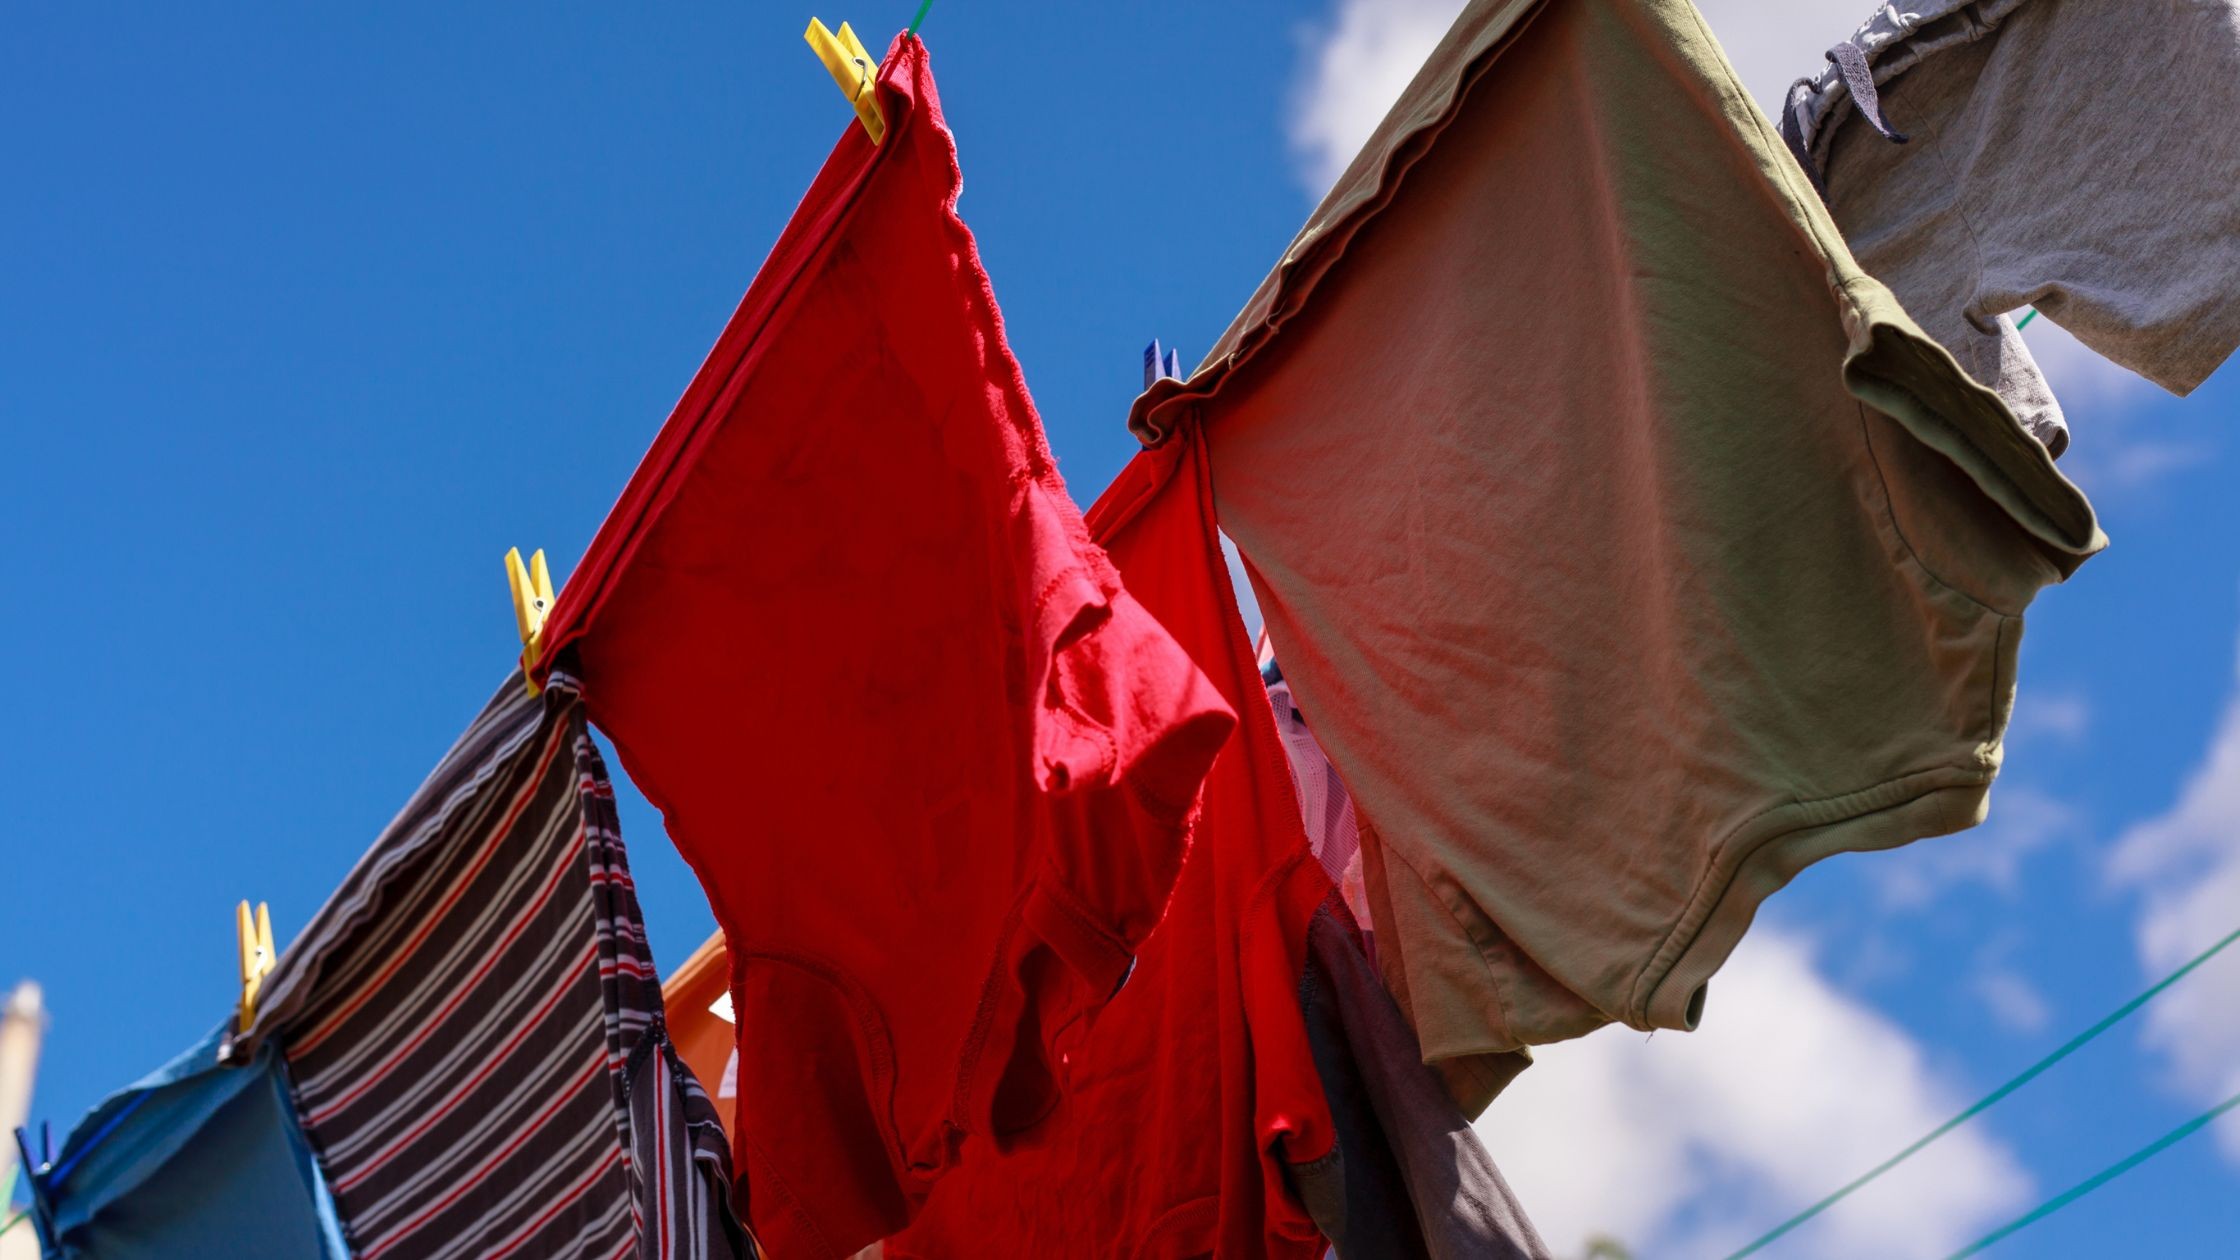 clothes drying outside